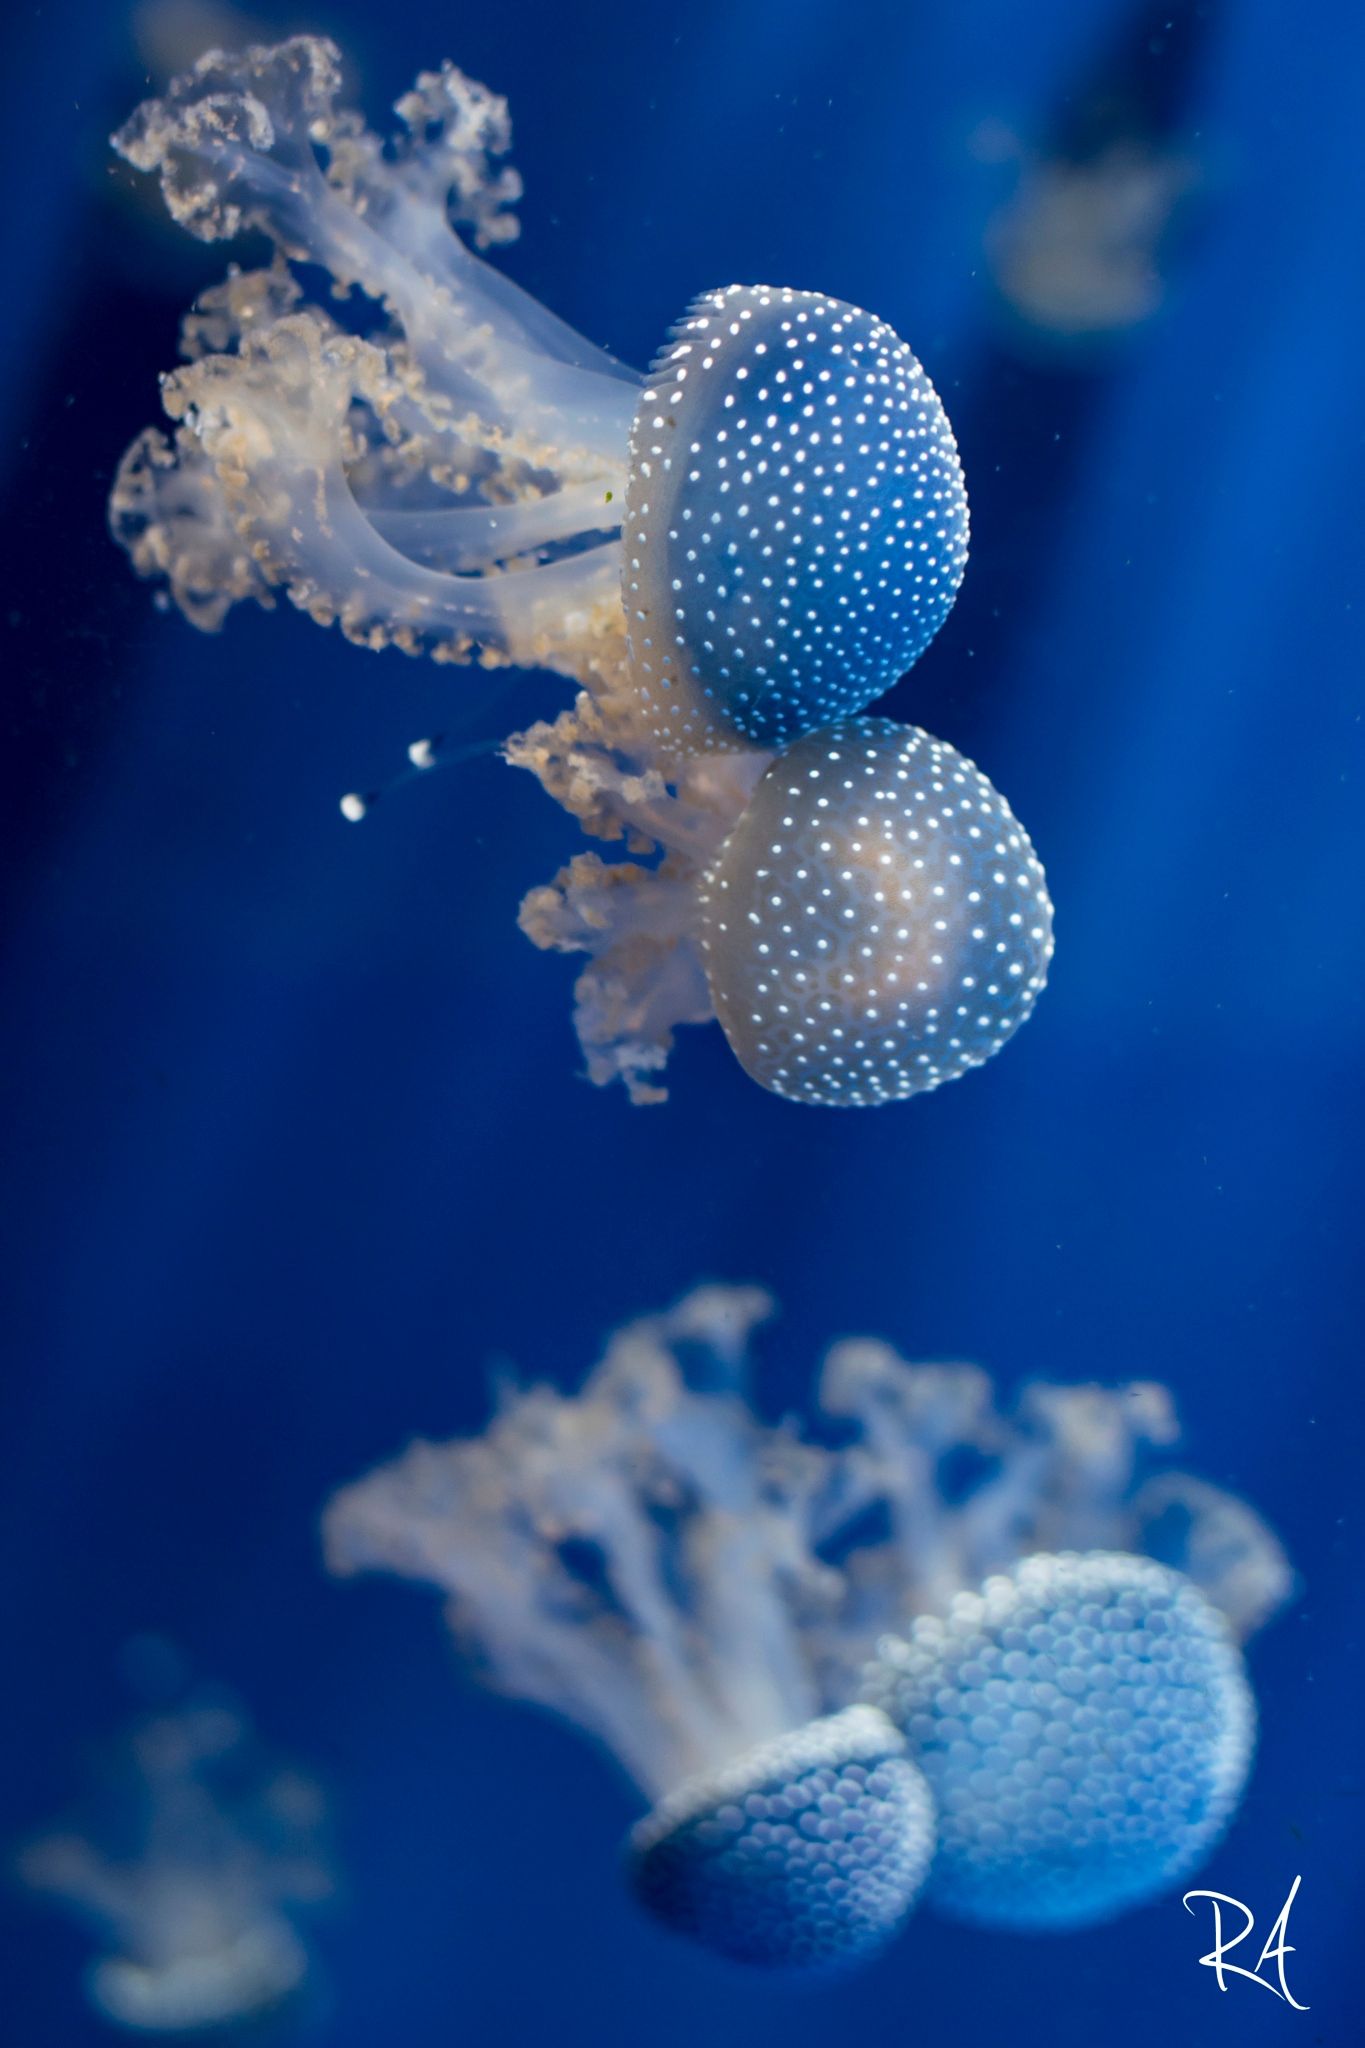 The Jellyfish dance - This shot has been taken in the acquarium of ...